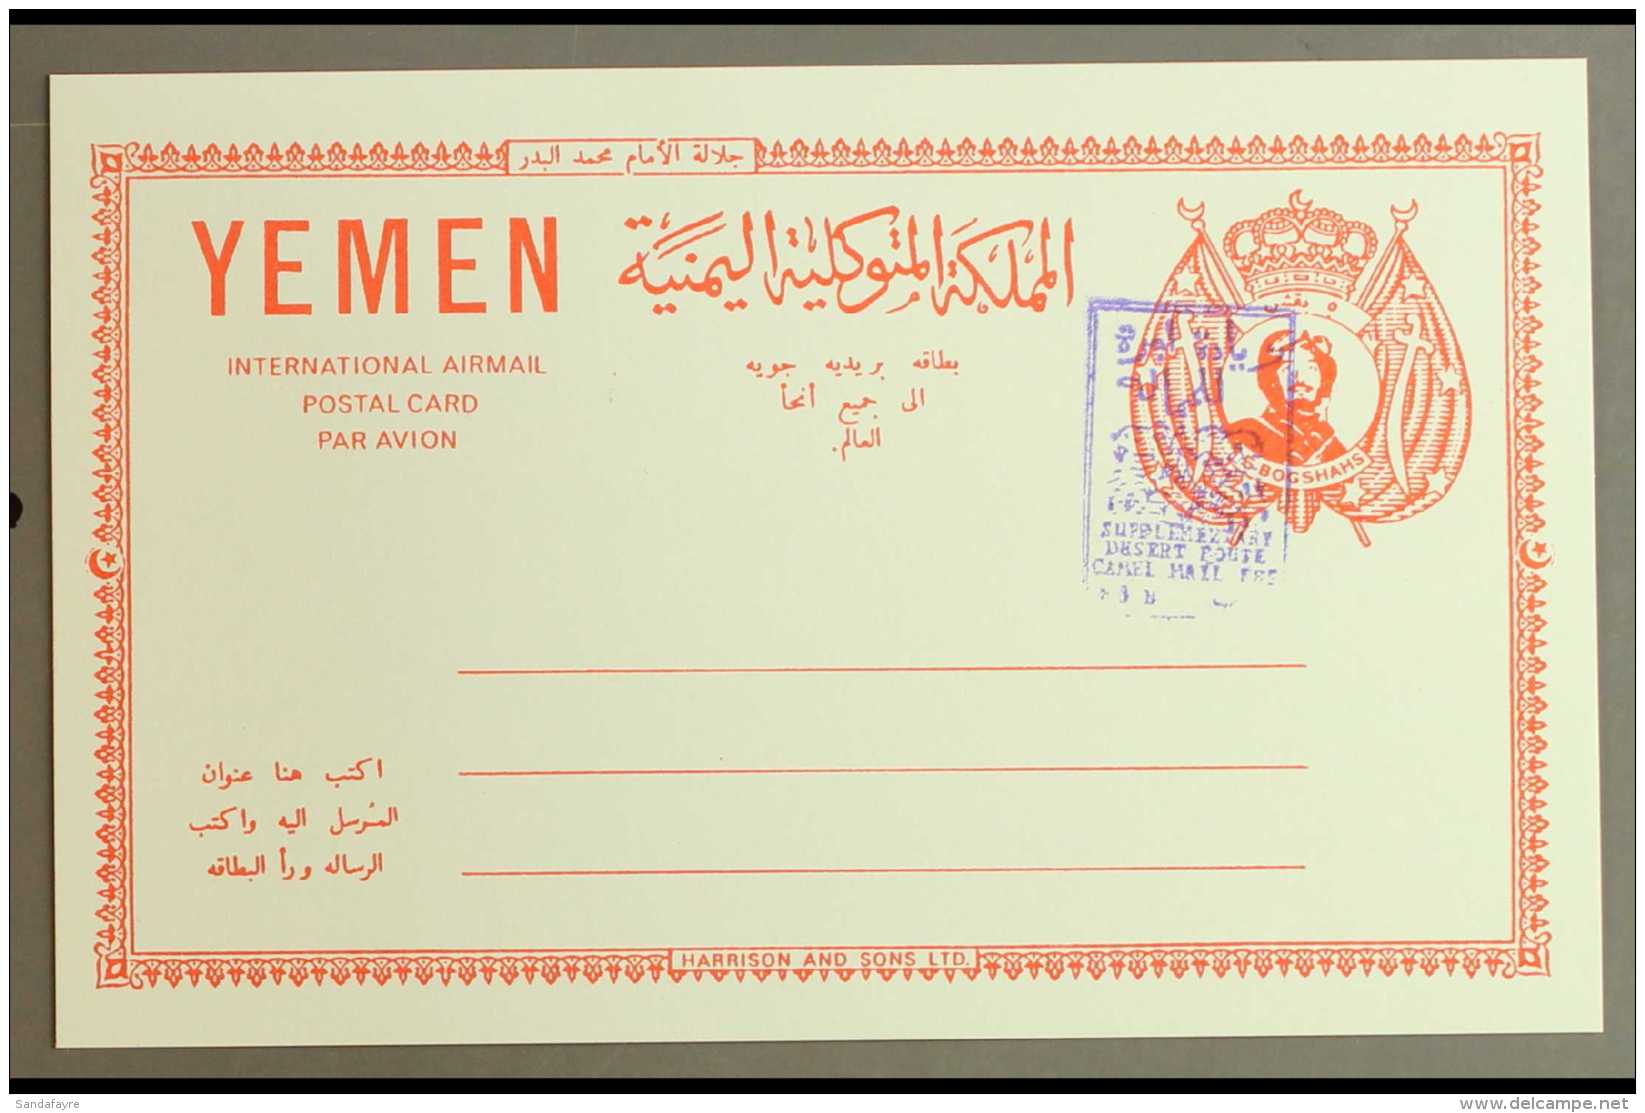 ROYALIST 1964 PROOF On Card (front Only) Of A 5b Red On Pale Blue Imam Al-Badr Airmail Postal Card, With An... - Yemen